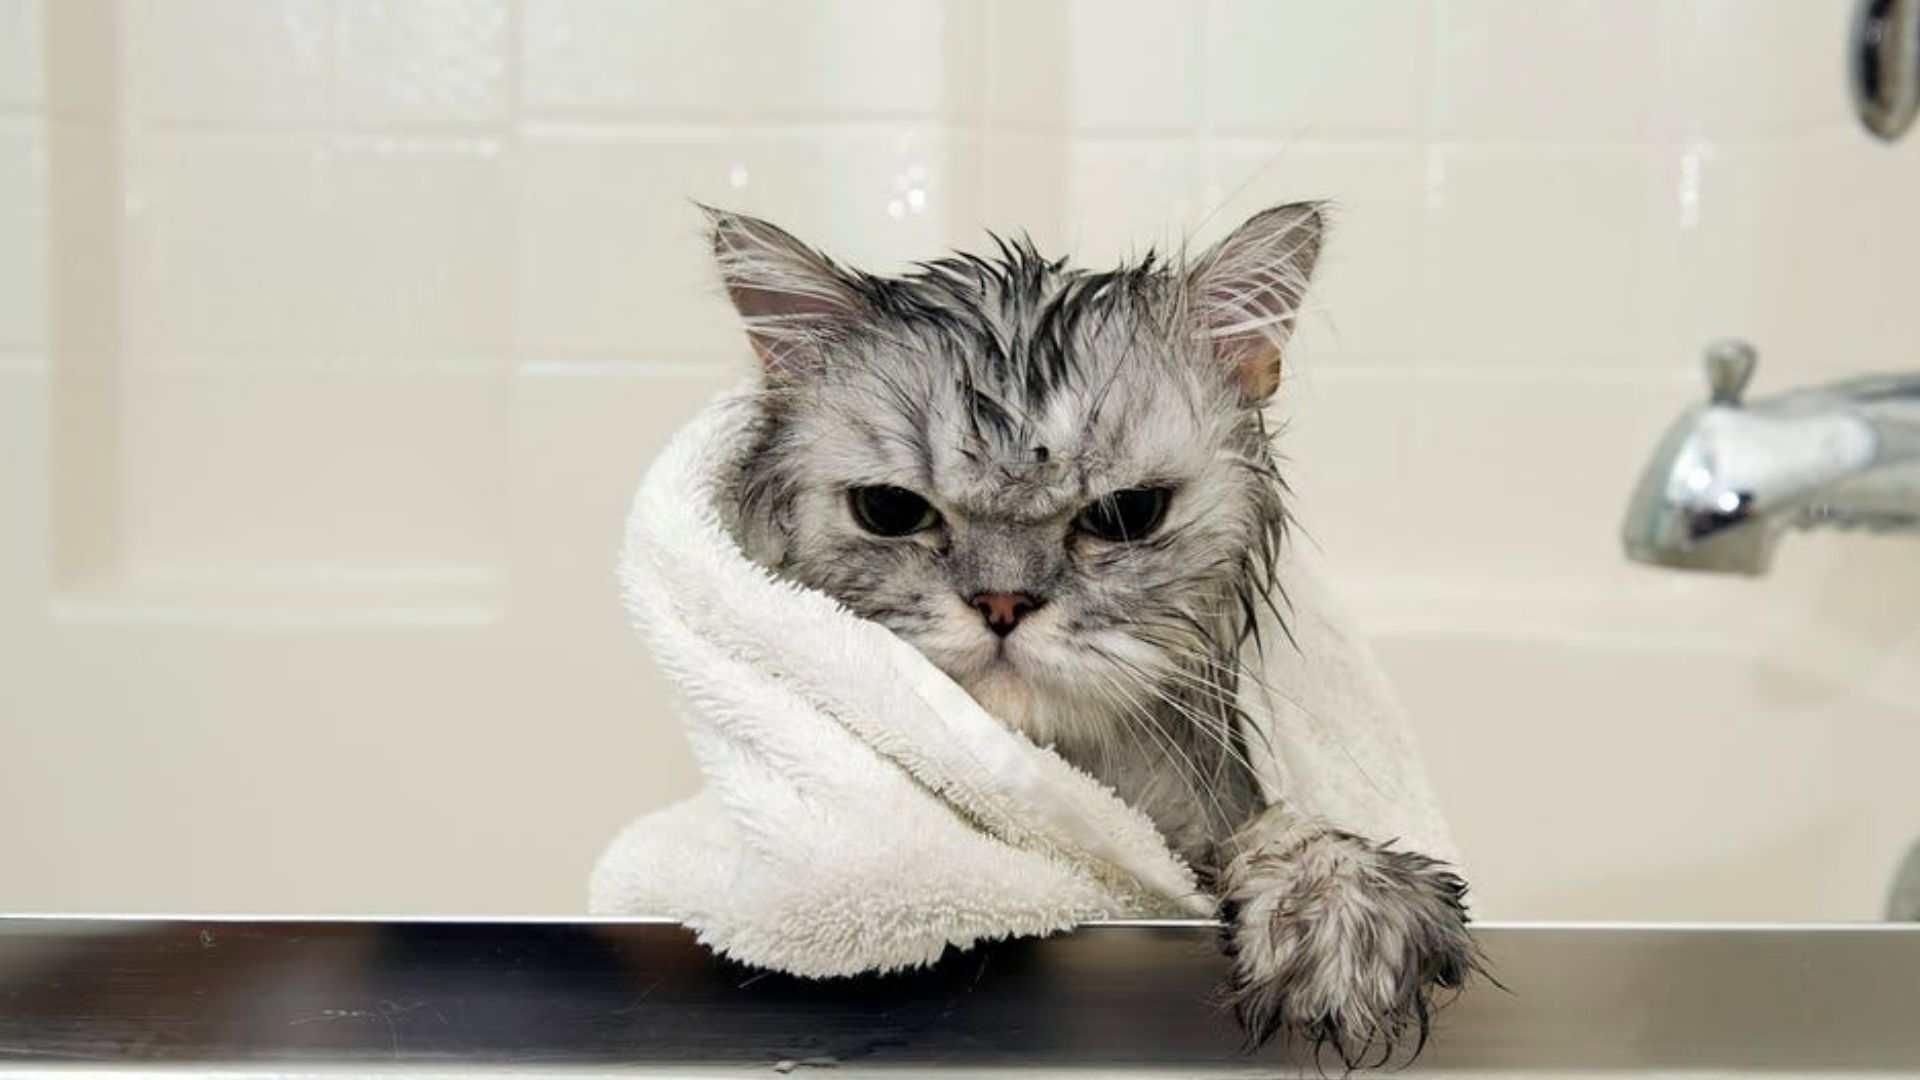 If you give often bath to your cats